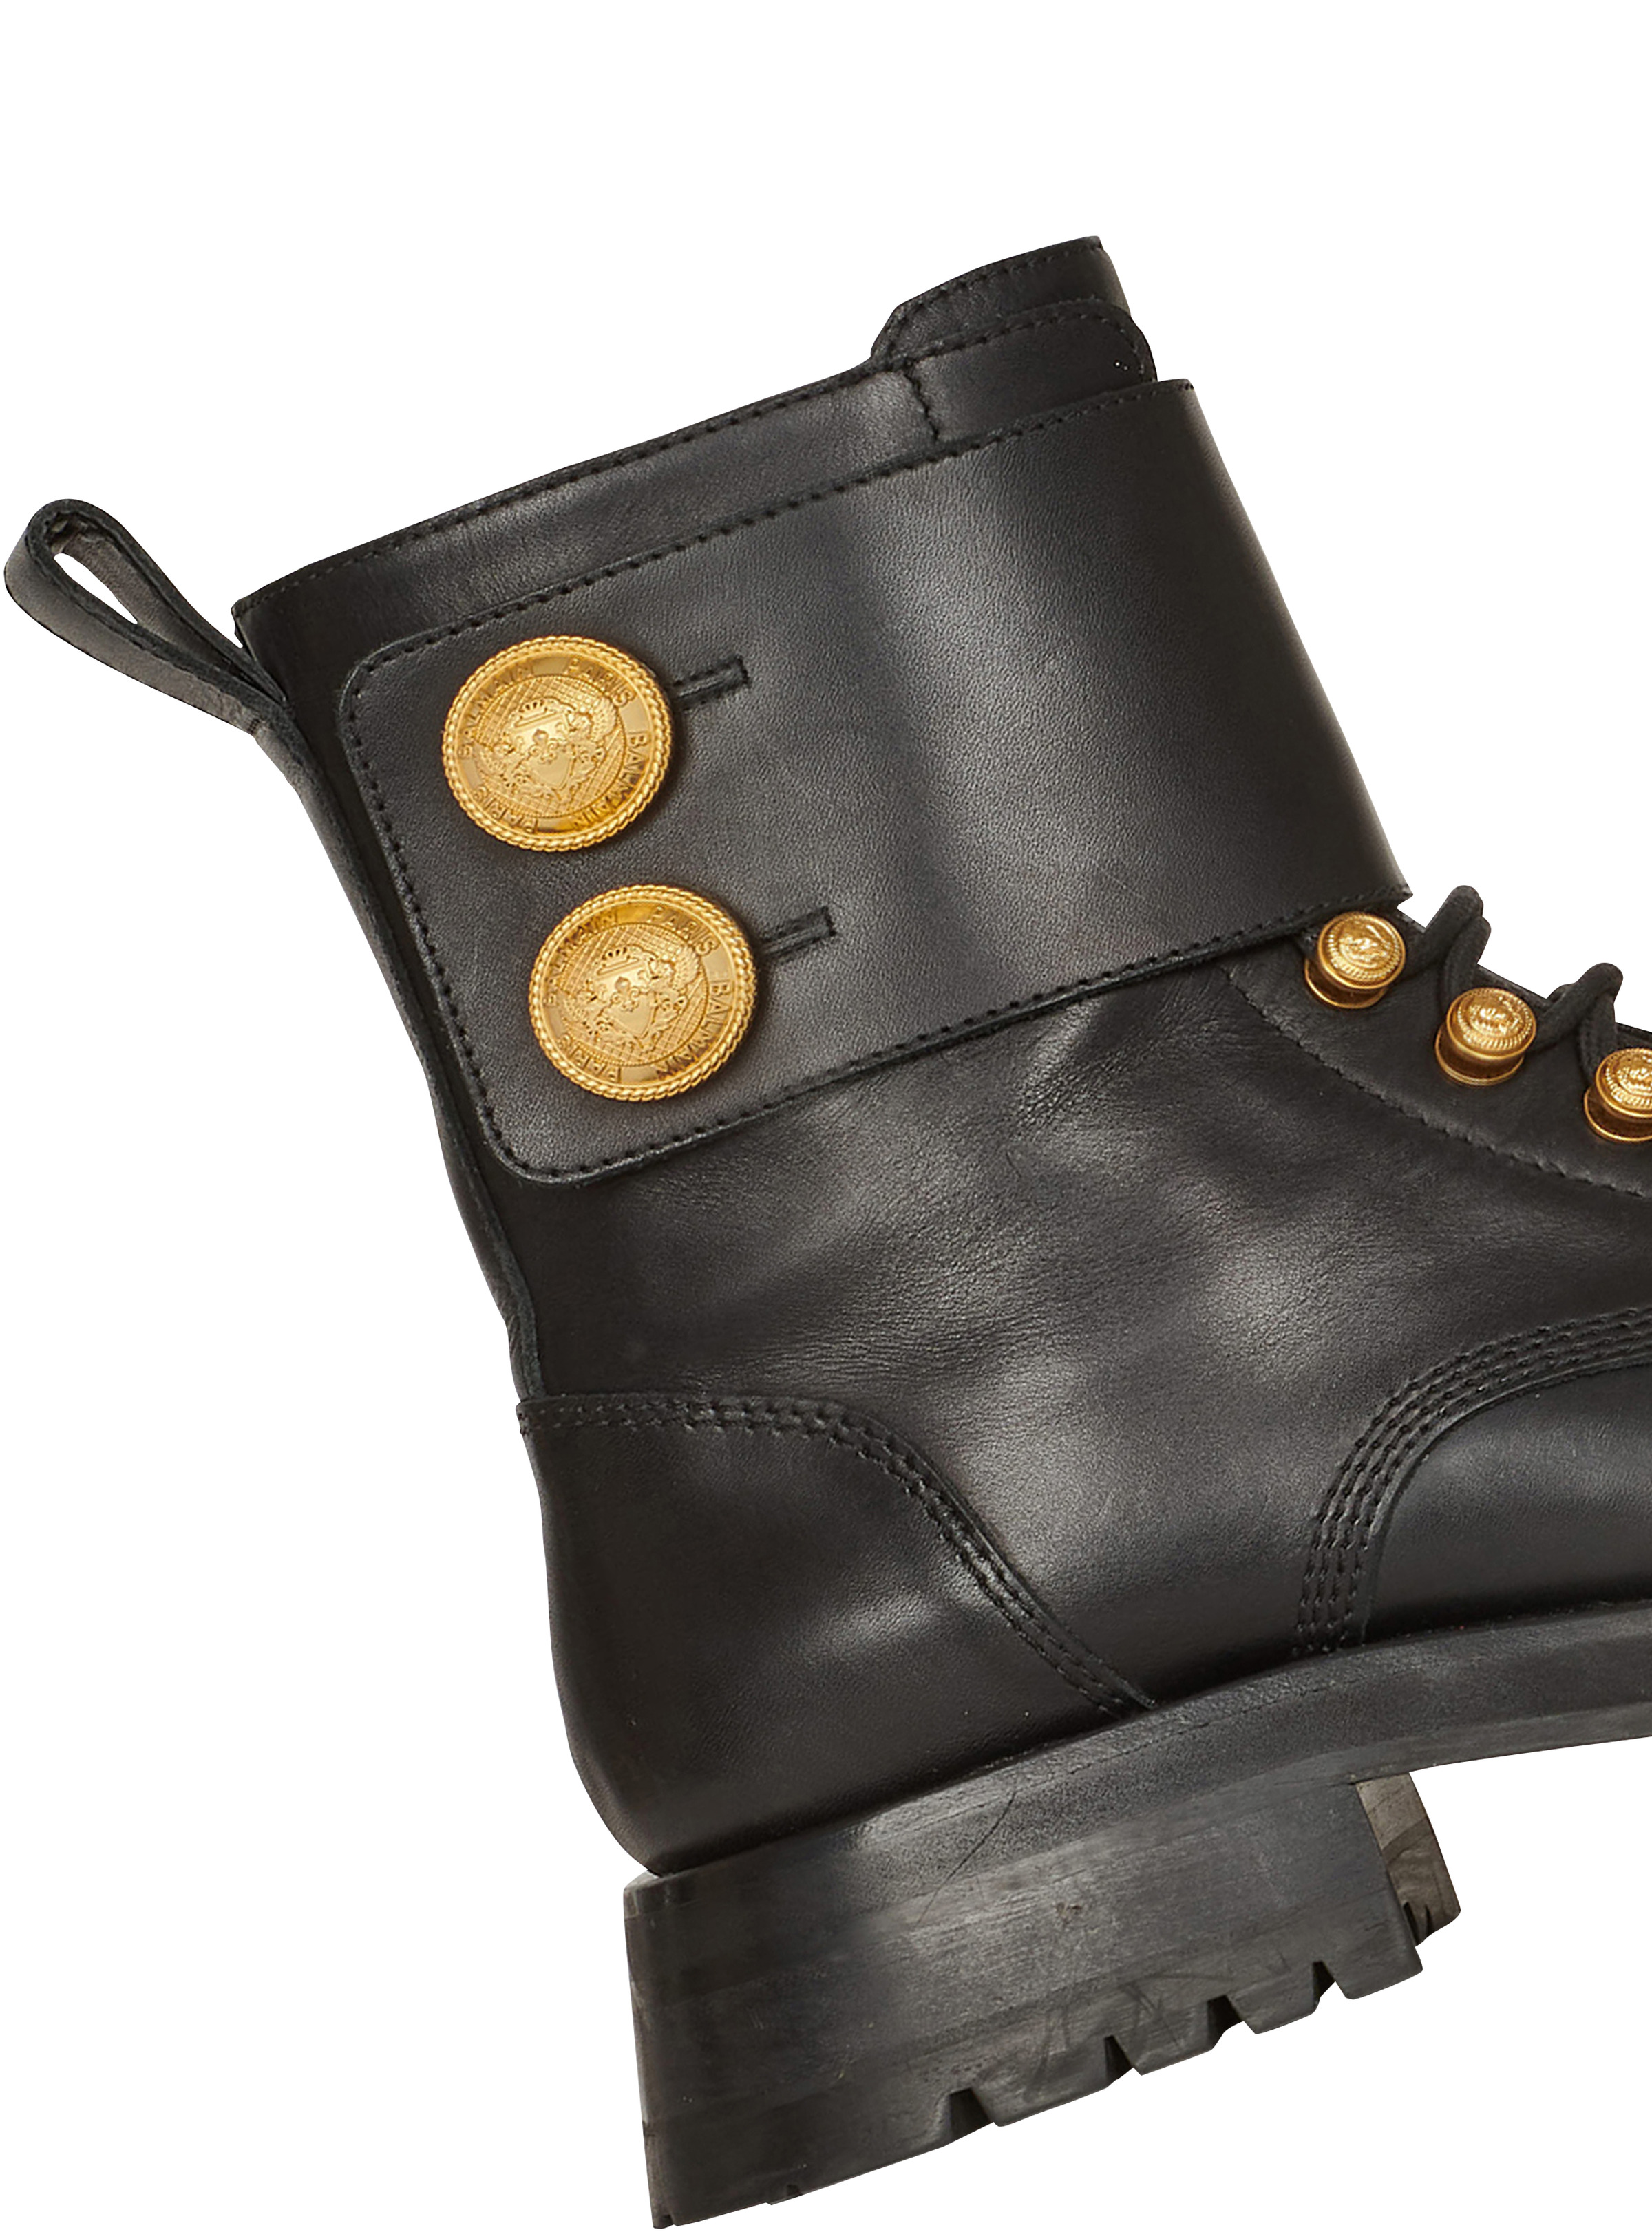 Ranger Army leather ankle boots - 6